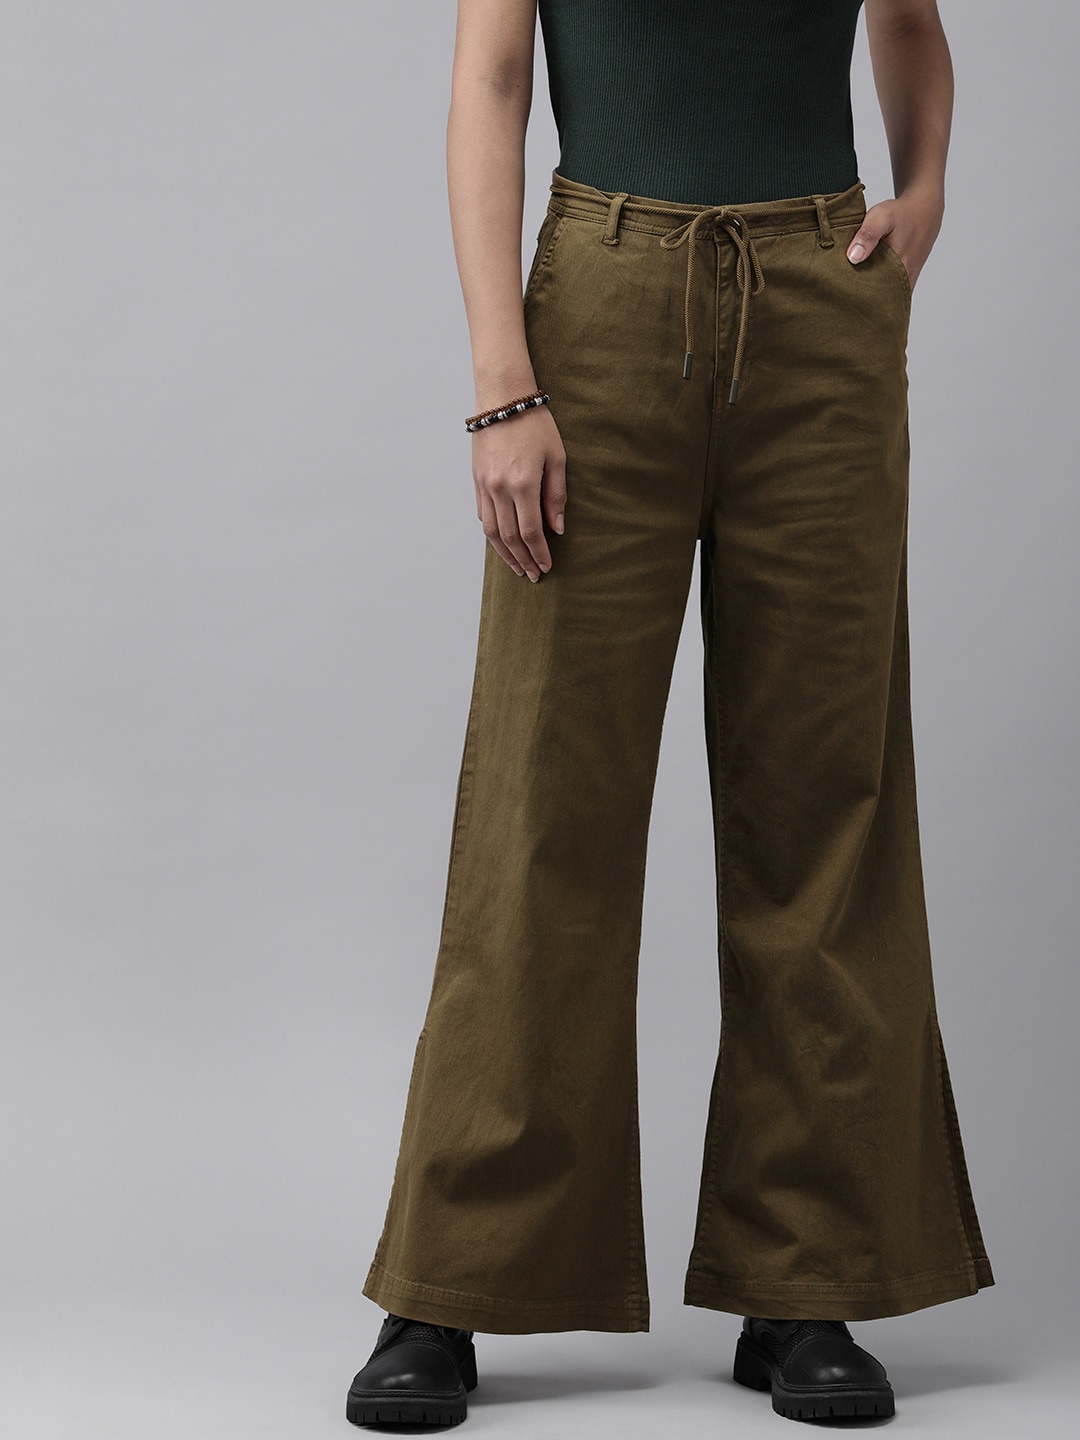 Roadster Women Olive Green Straight Fit Trousers Price in India